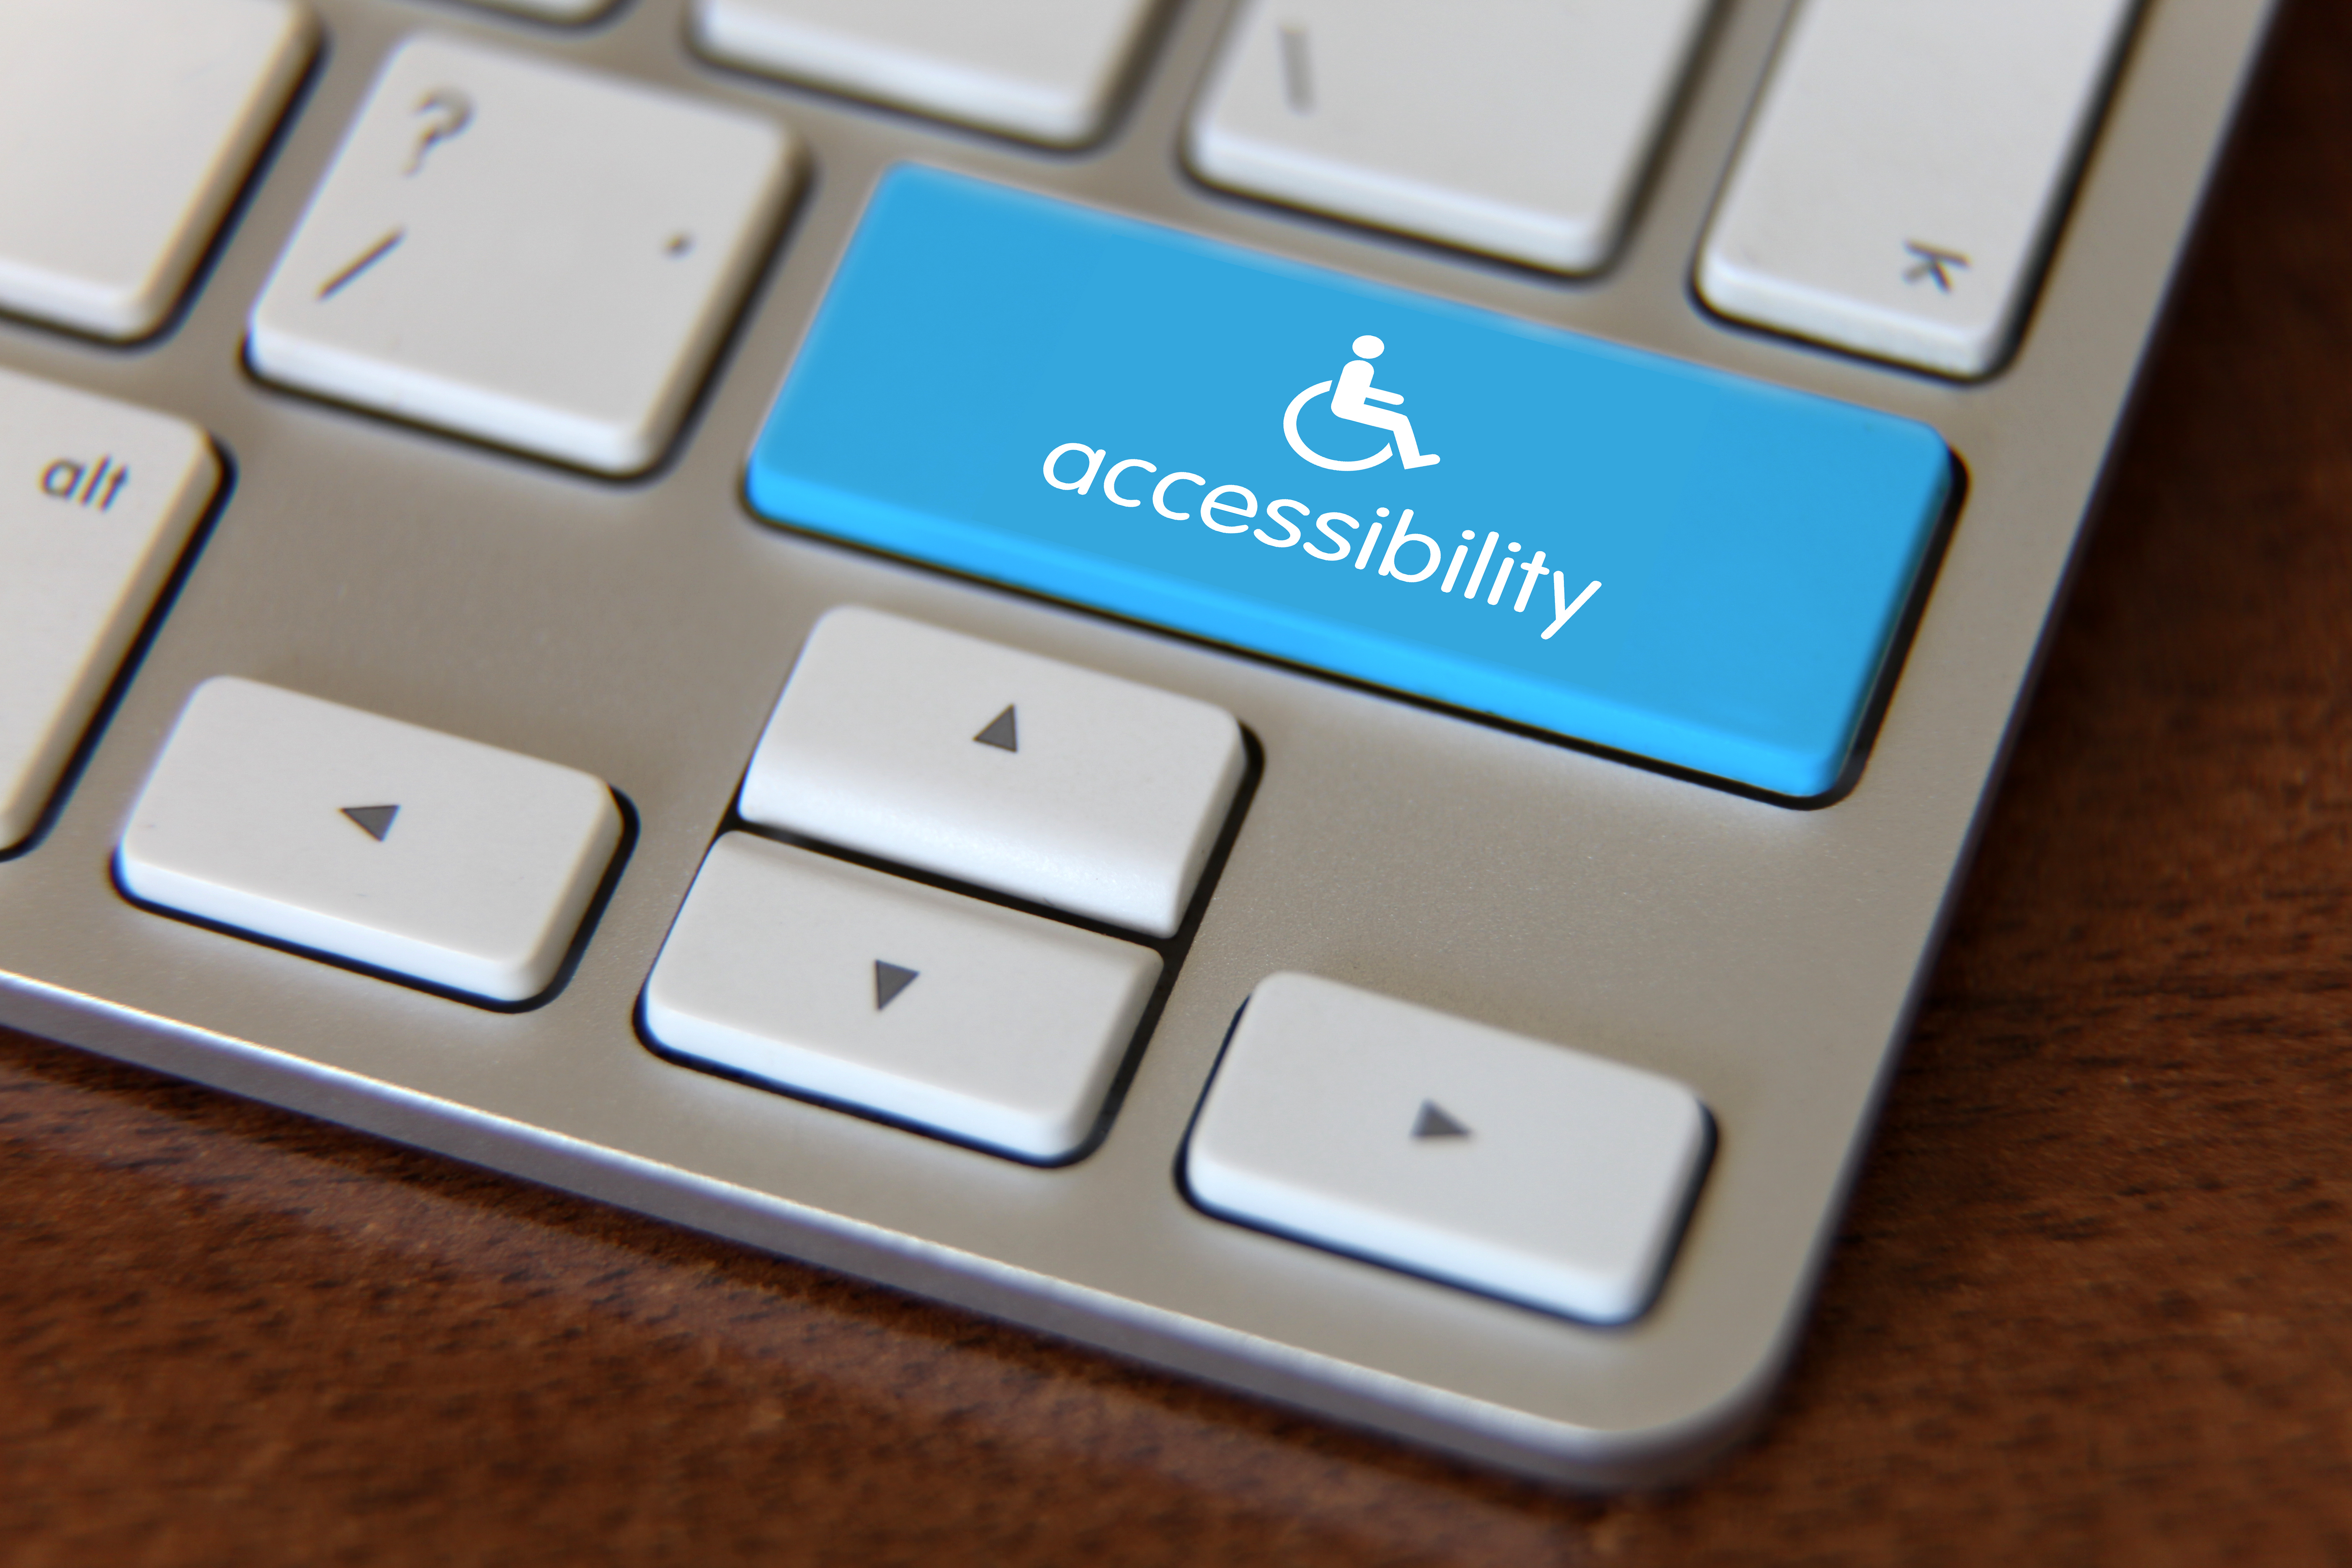 Image of a keyboard and a blue button above the arrow keys of the handicap symbol with "accessibility" written under it.